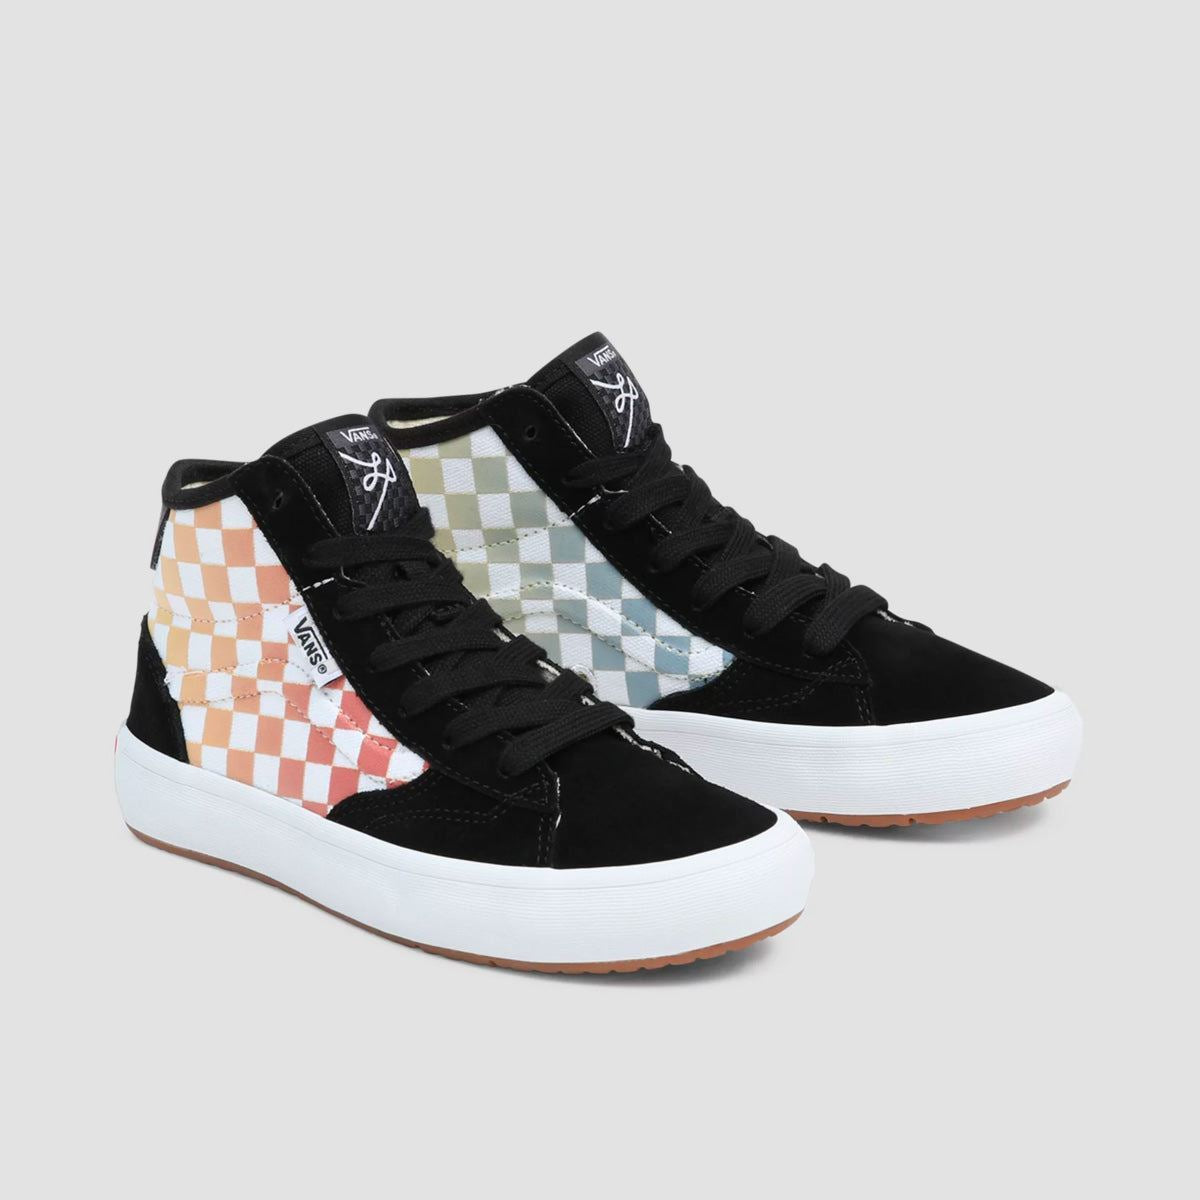 Vans The Lizzie High Top Shoes - Checkerboard Black/Multi